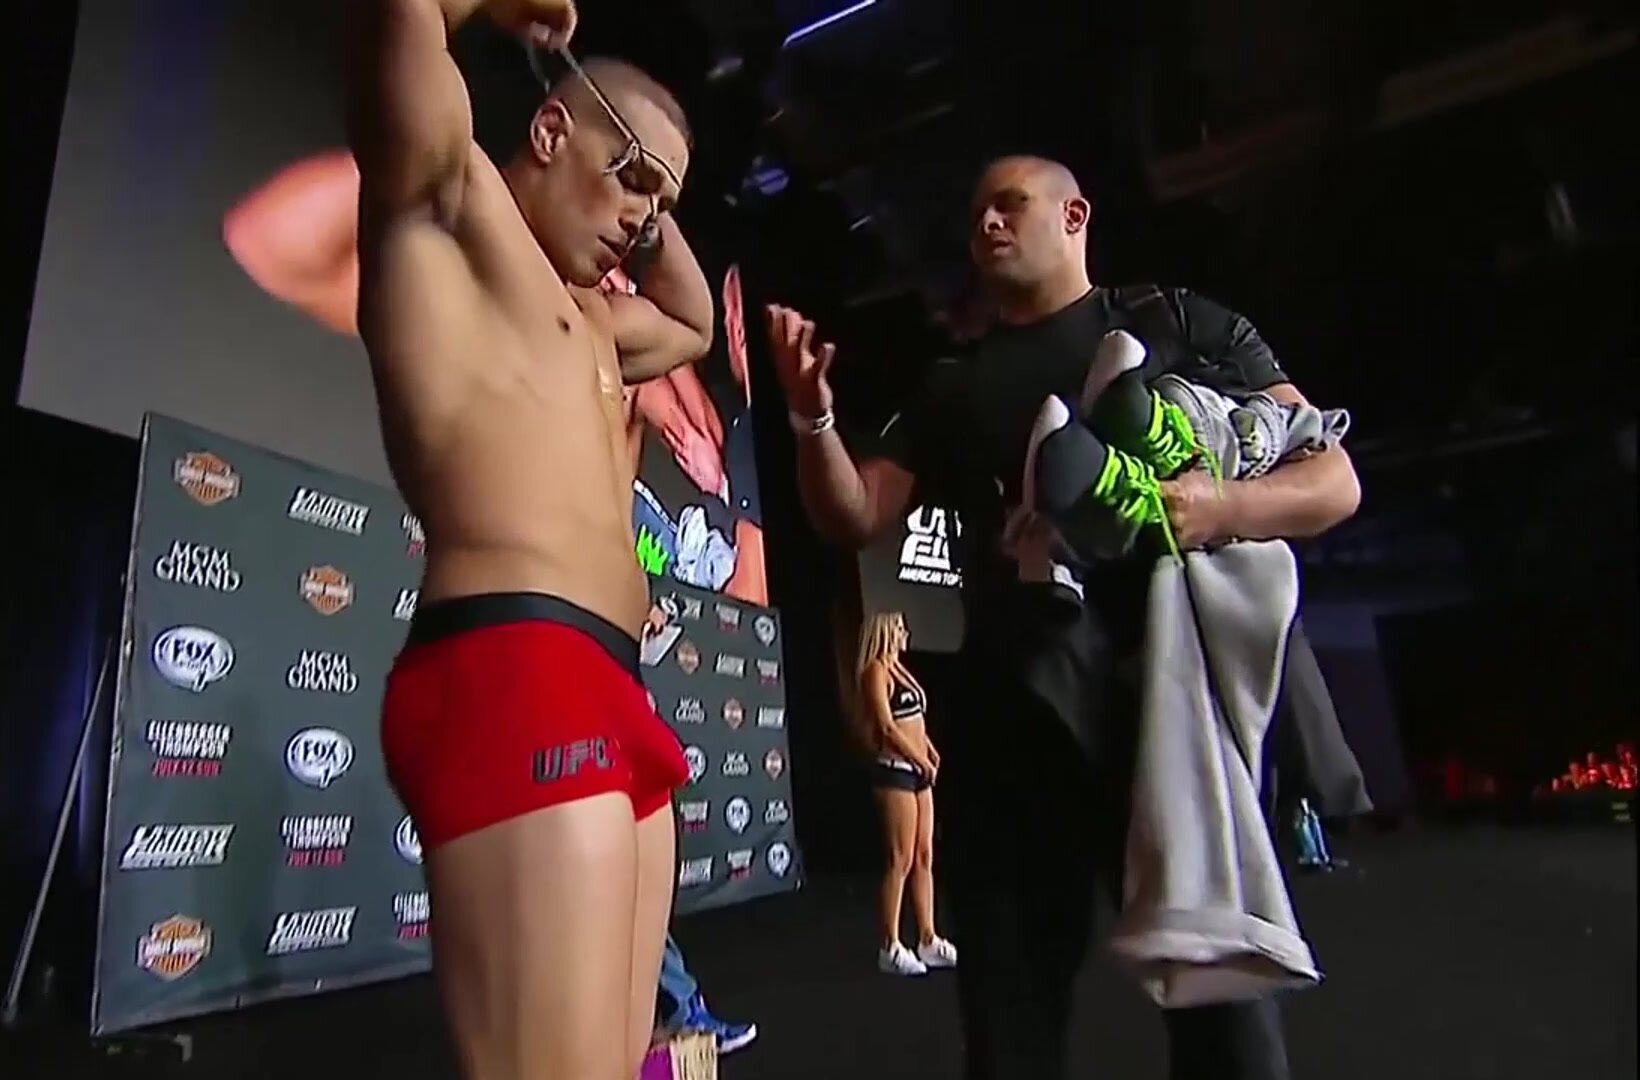 bulging in red boxerbriefs at weigh in